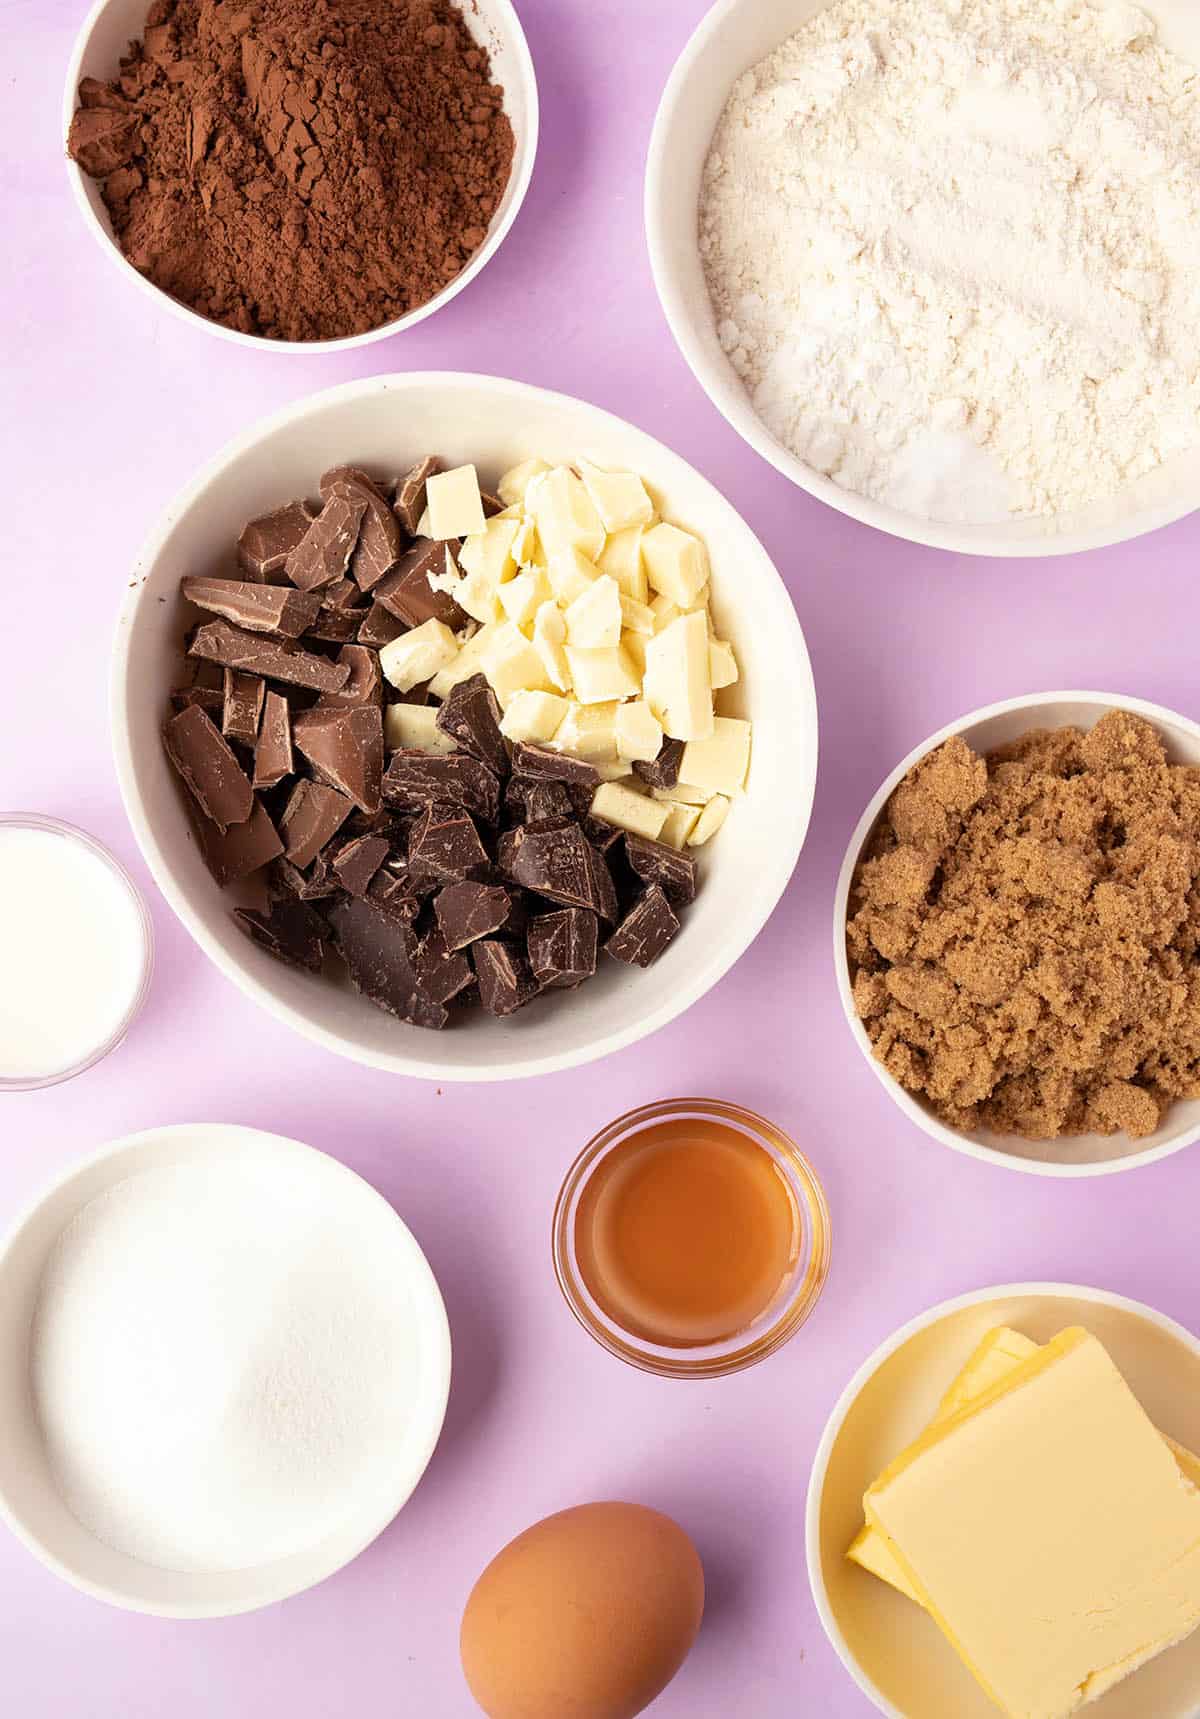 All the ingredients needed to make a batch of Triple Chocolate Cookies.